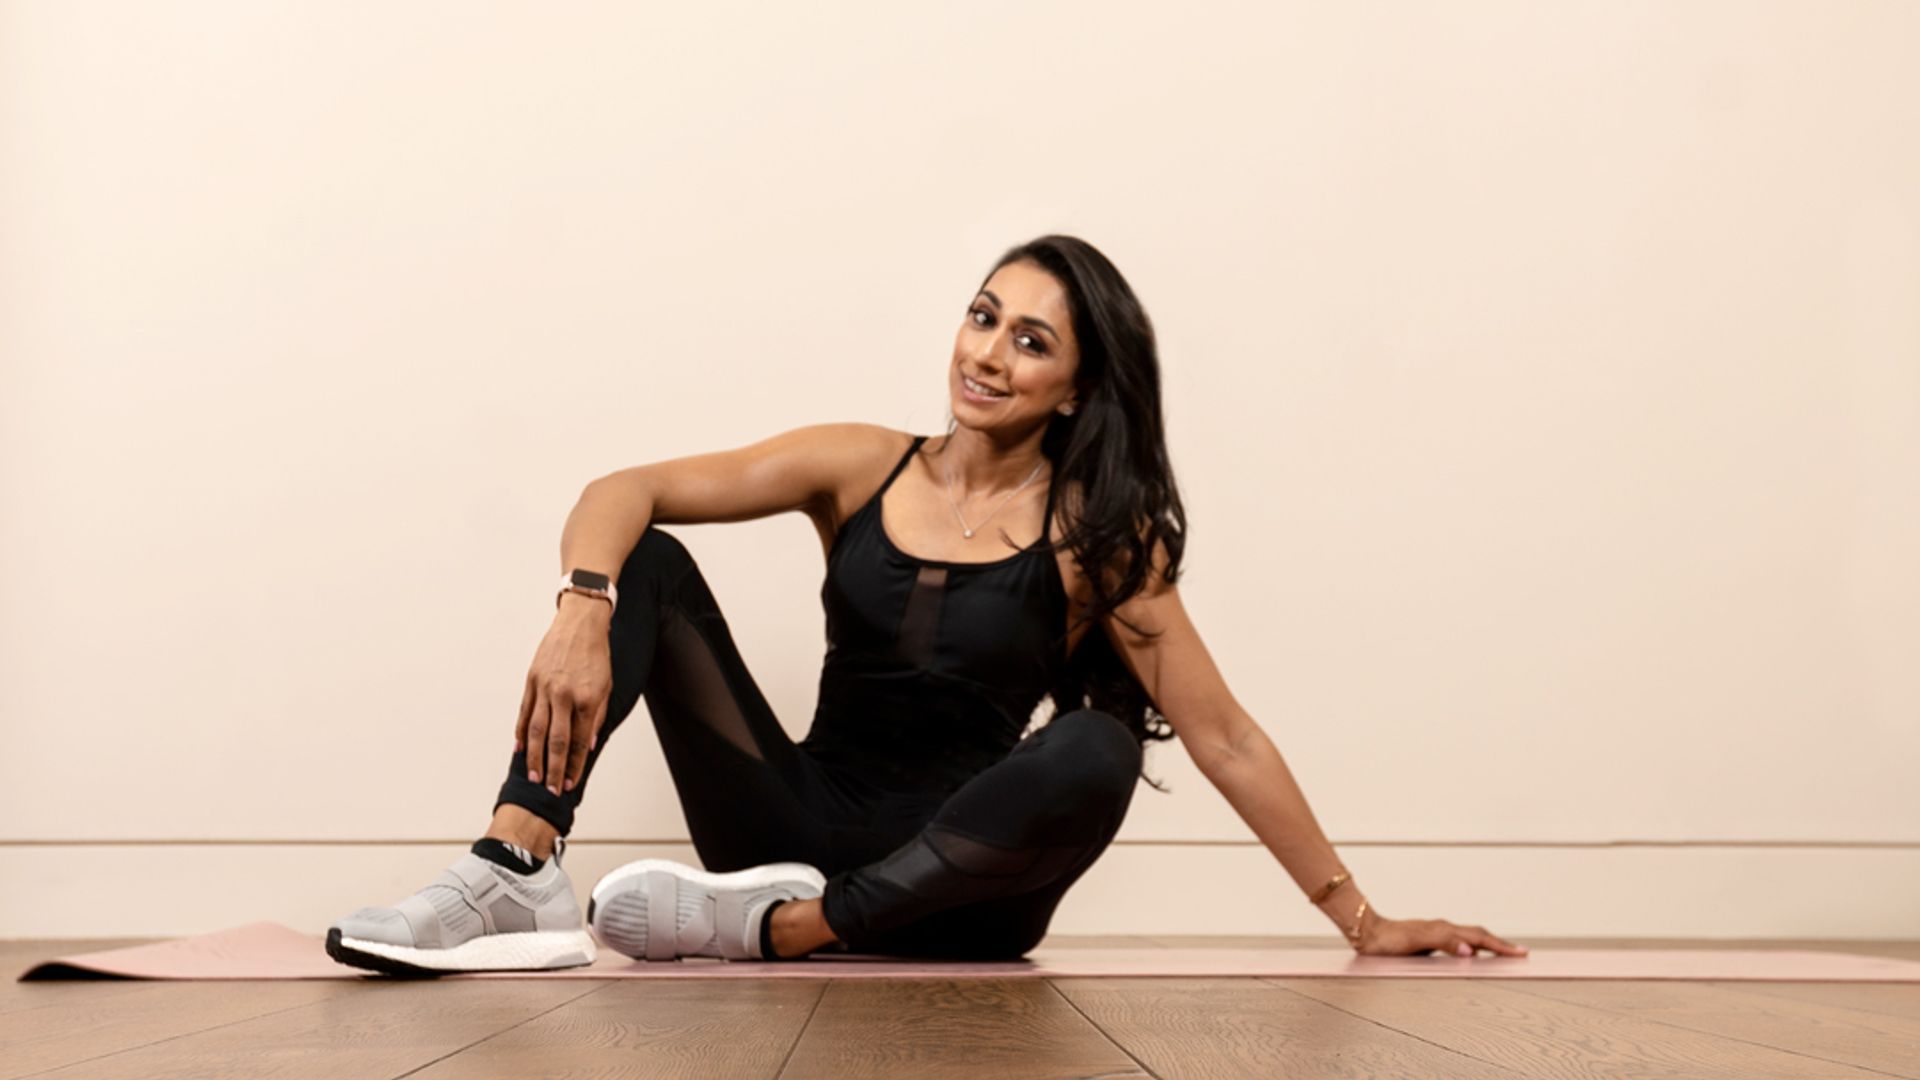 woman in exercise wear sitting on a yoga mat